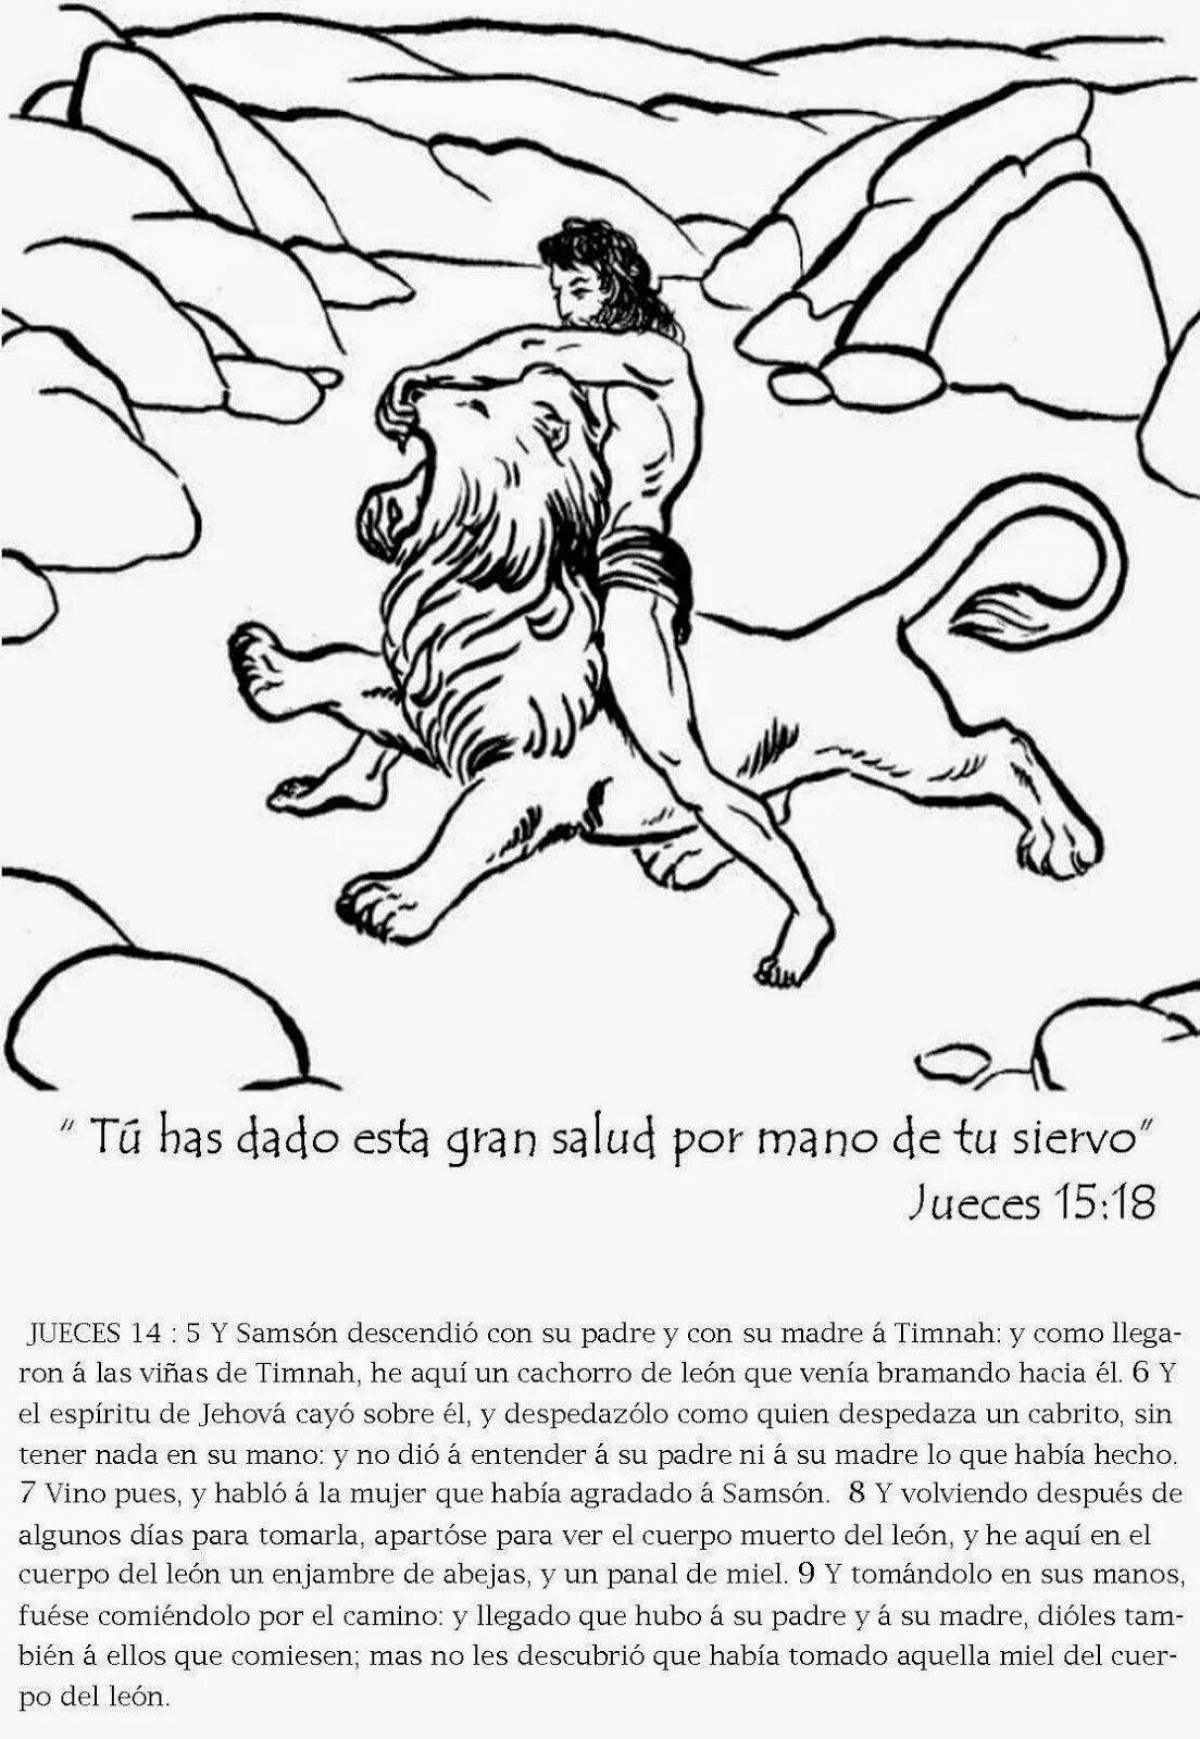 Colorful coloring page of the 12 labors of hercules